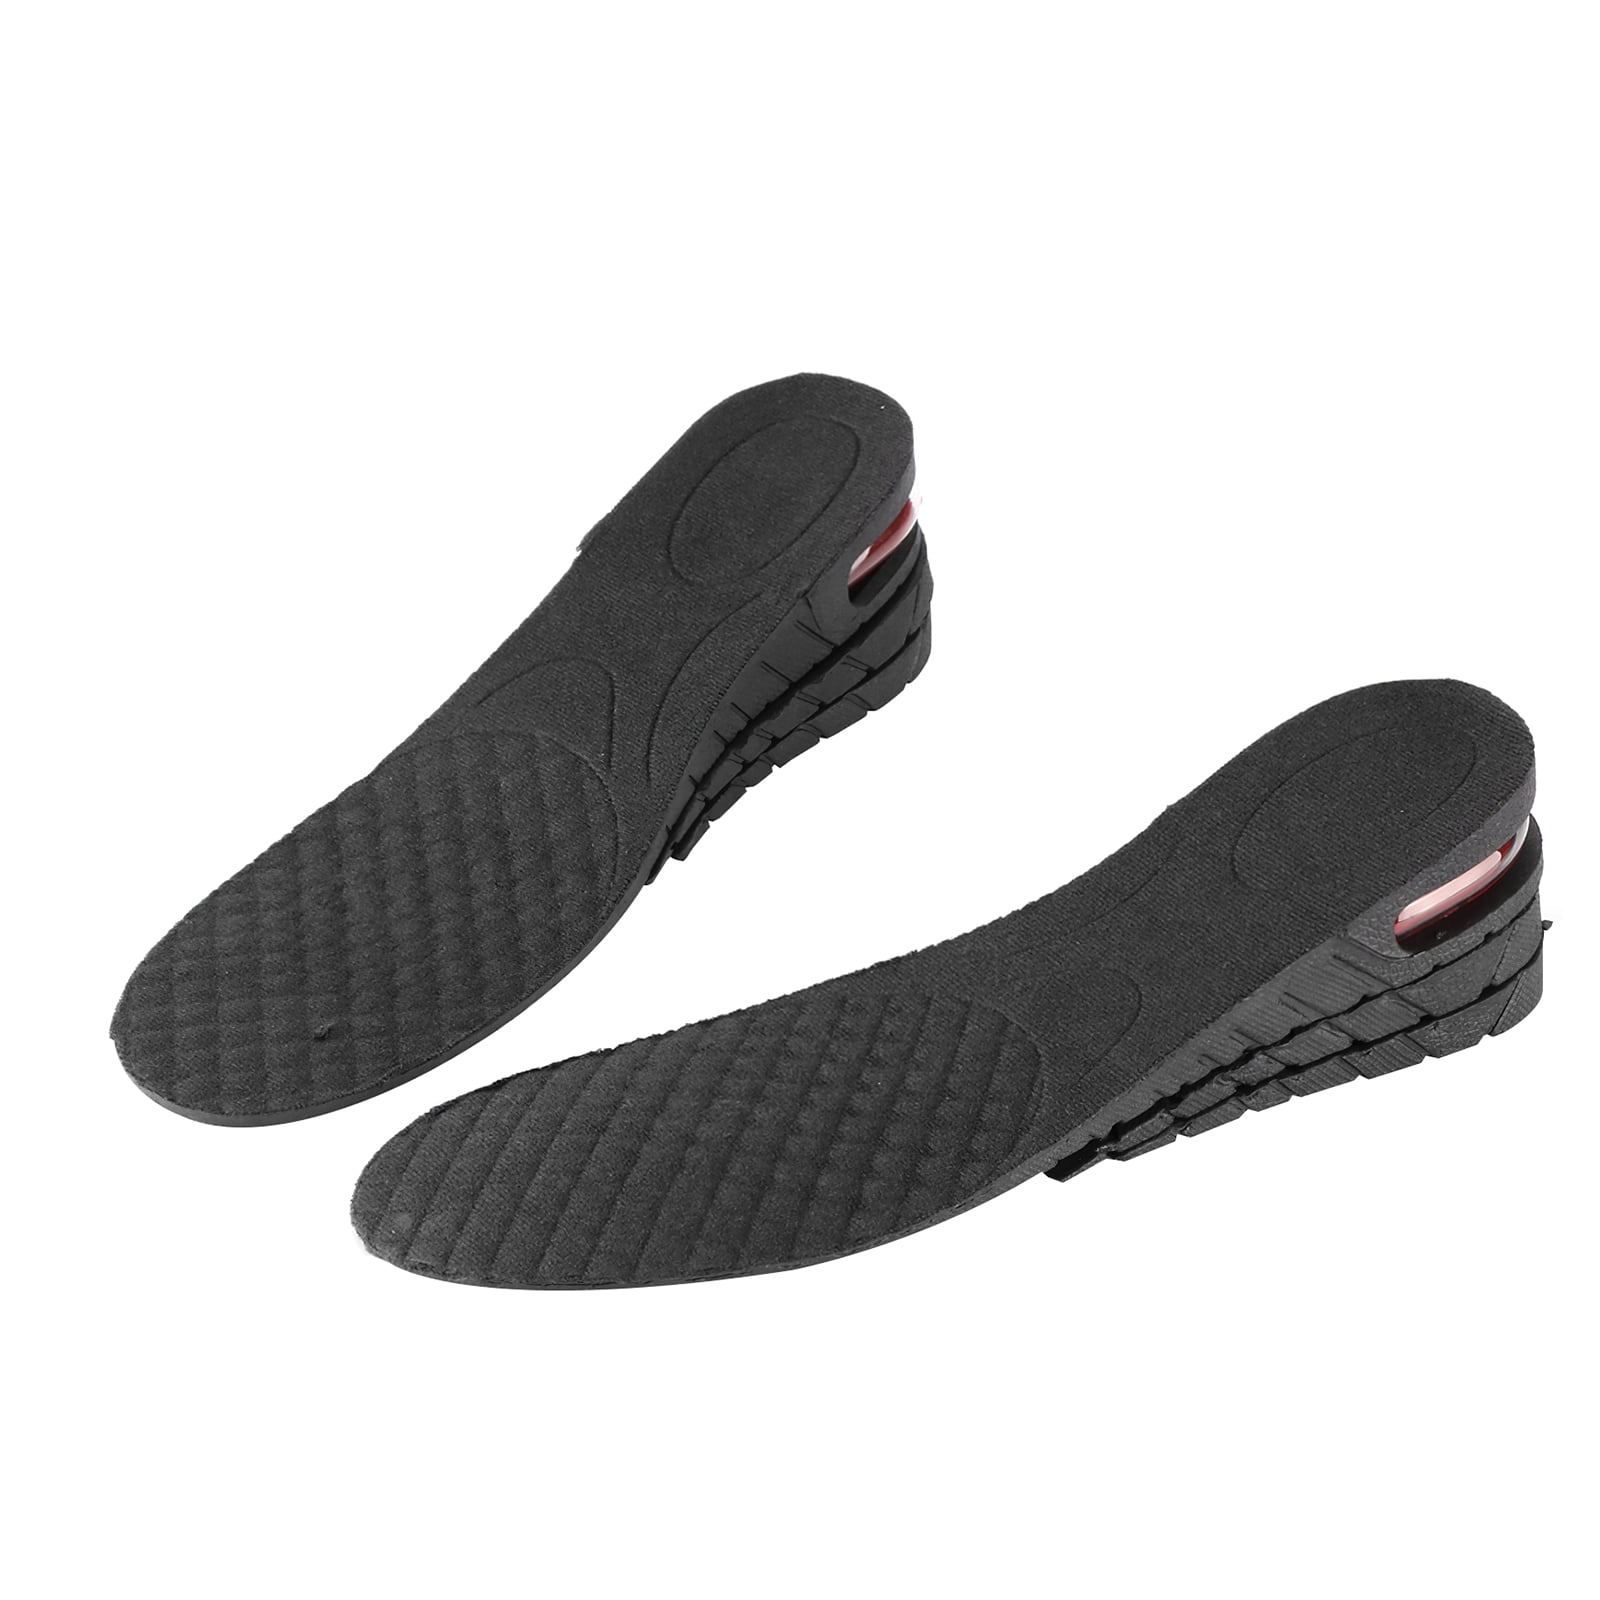 2-Layer Shoe Lifts For Men 2" Height Increase Insole Men's Size 6.5-9 